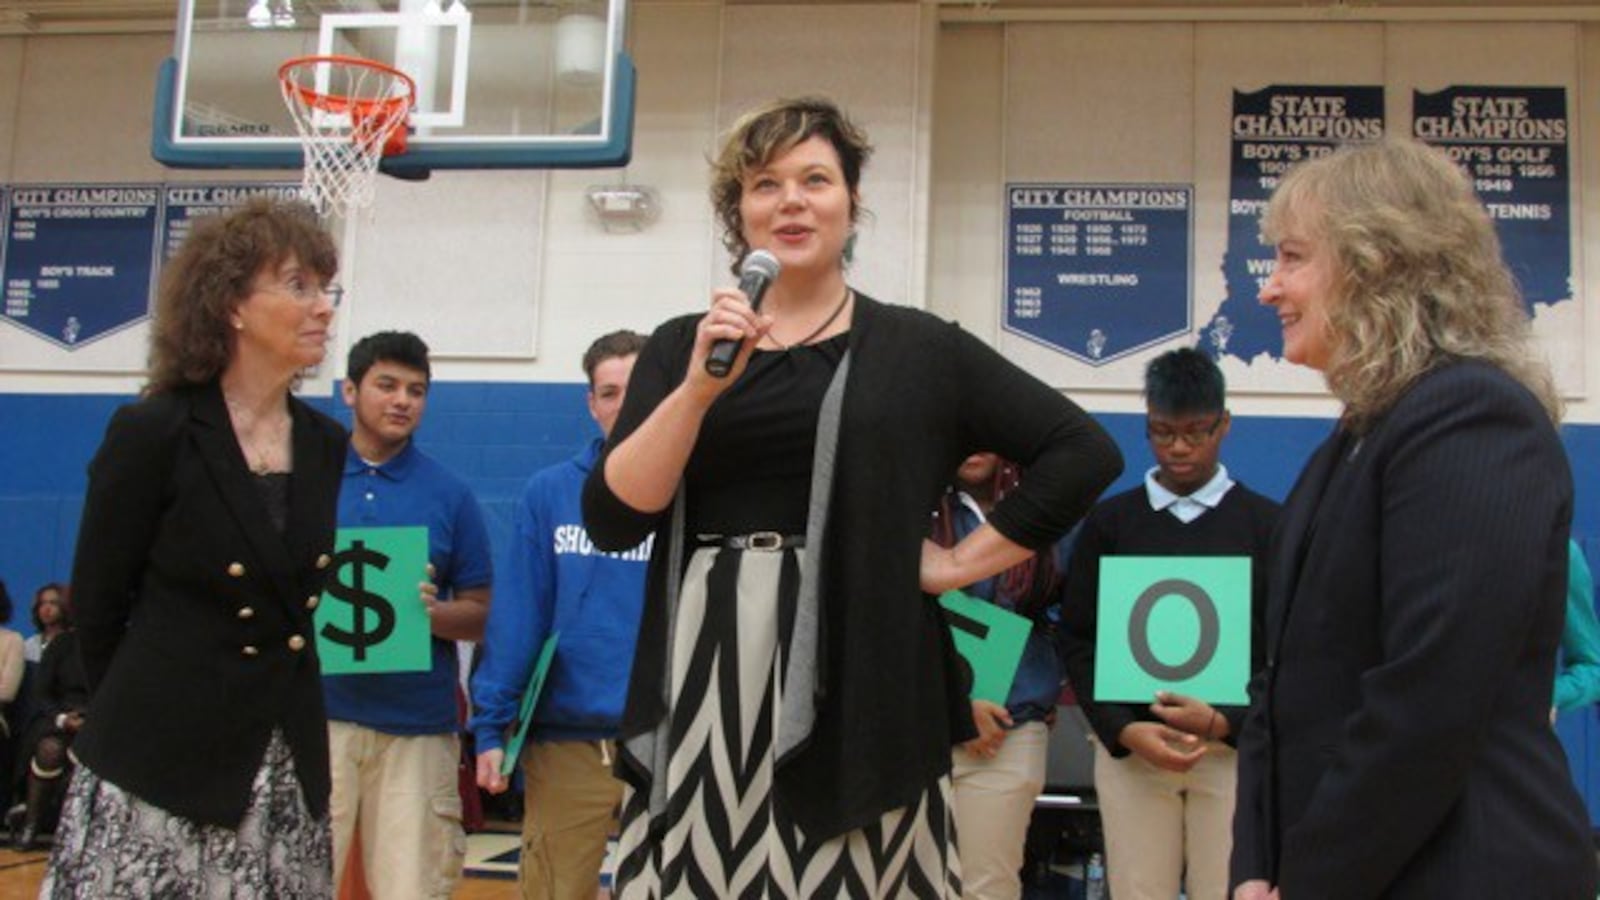 English teacher Melody Coryell speaks to Shortridge High School students after receiving the $25,000 Milken Award from Jane Foley, senior vice president of the Milken Educator Awards (left) and Indiana state Superintendent Glenda Ritz (right).